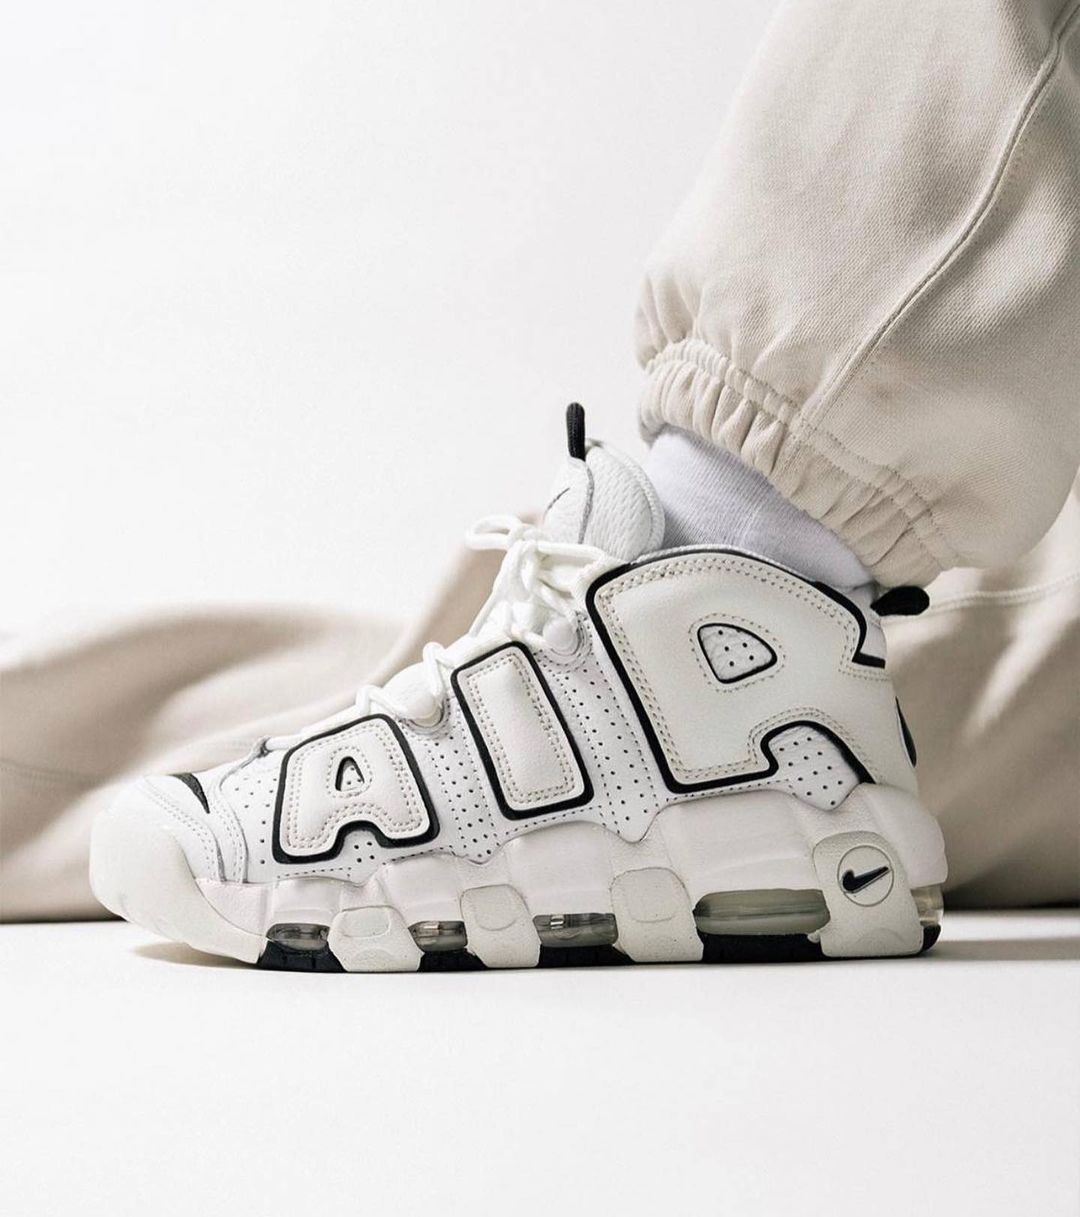 Nike Air First Copy Shoe Uptempo White and Black